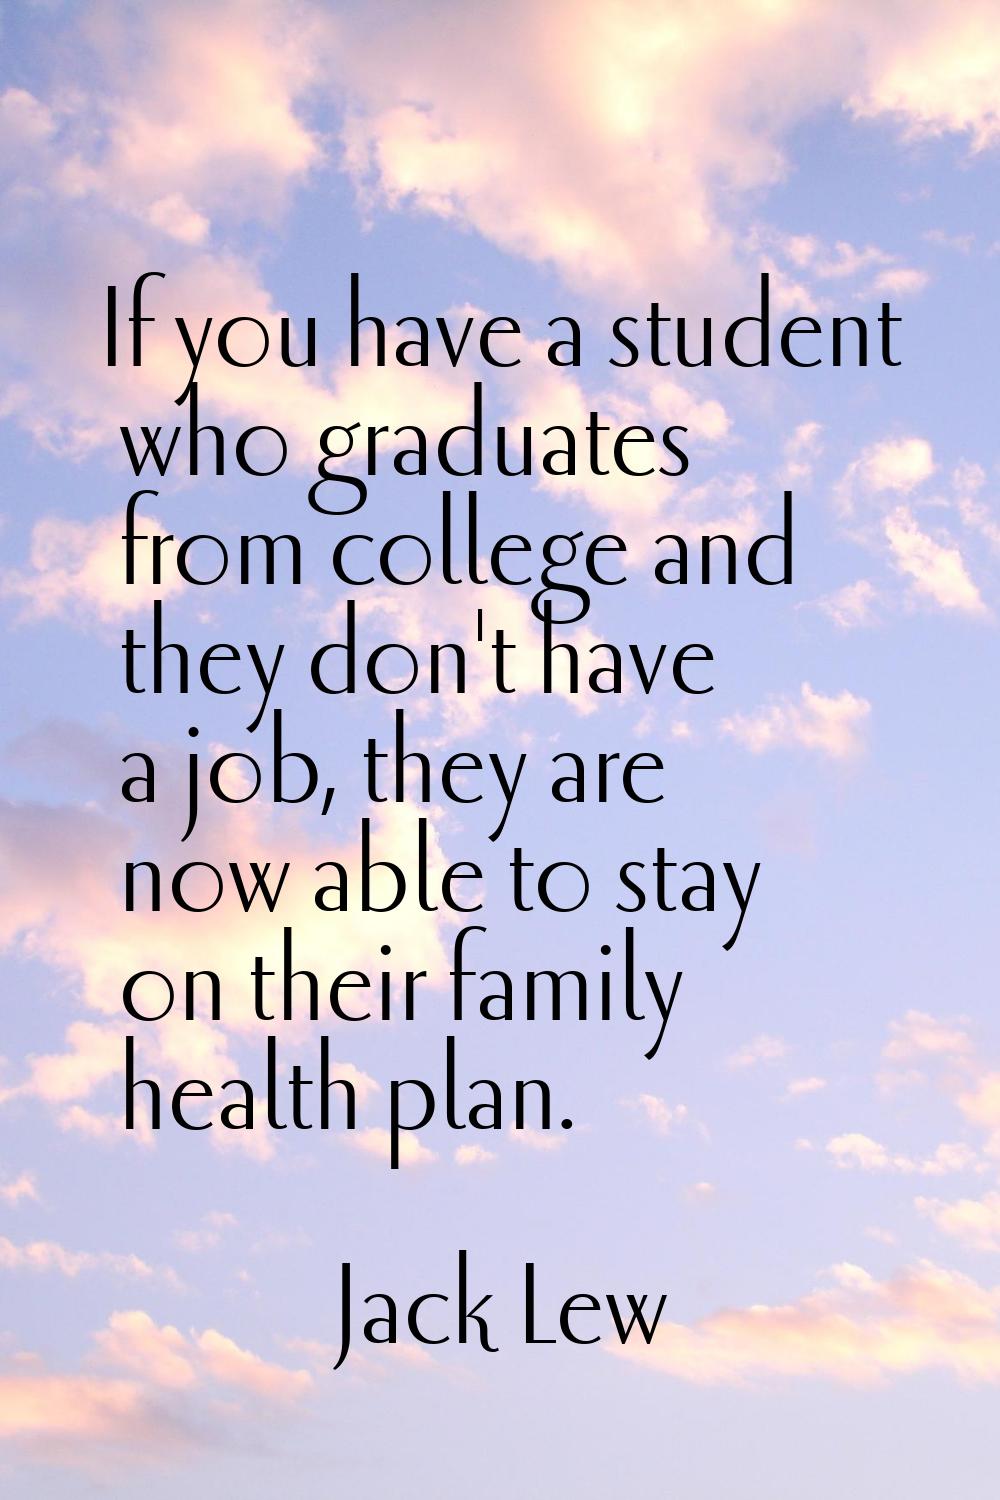 If you have a student who graduates from college and they don't have a job, they are now able to st